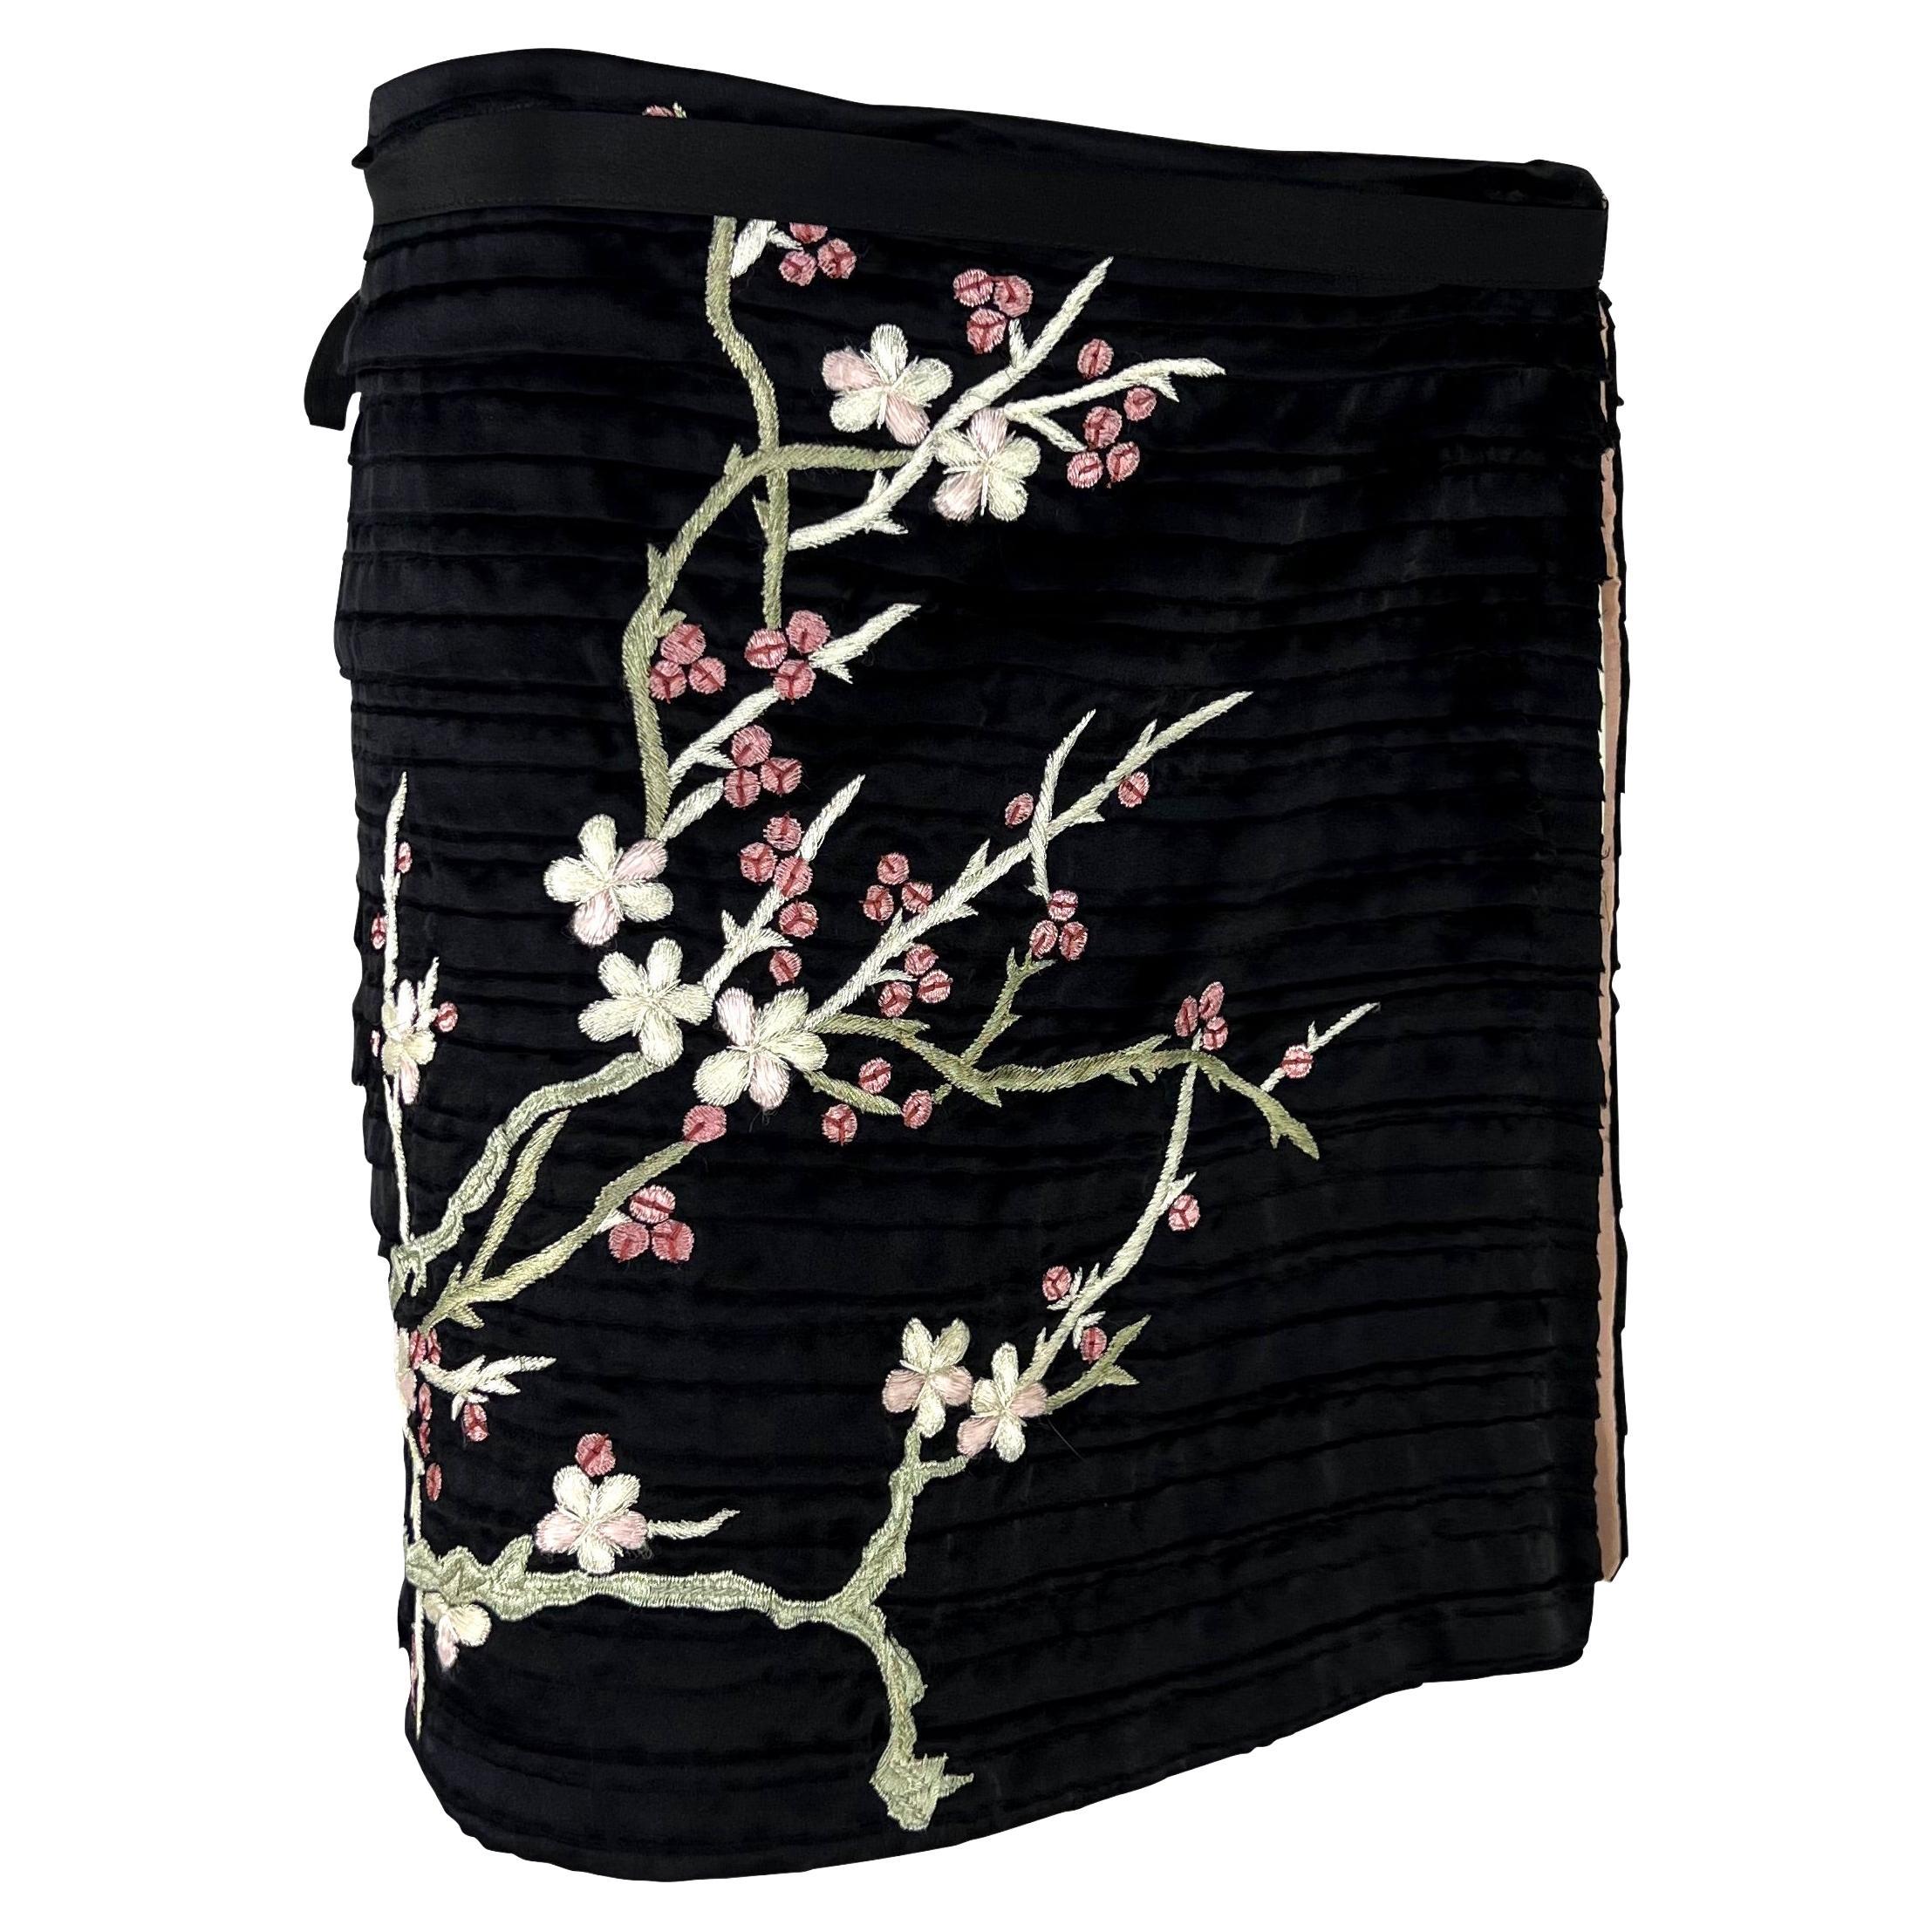 S/S 2003 Gucci by Tom Ford Japanese Cherry Blossom Embroidered Mini Wrap Skirt 2